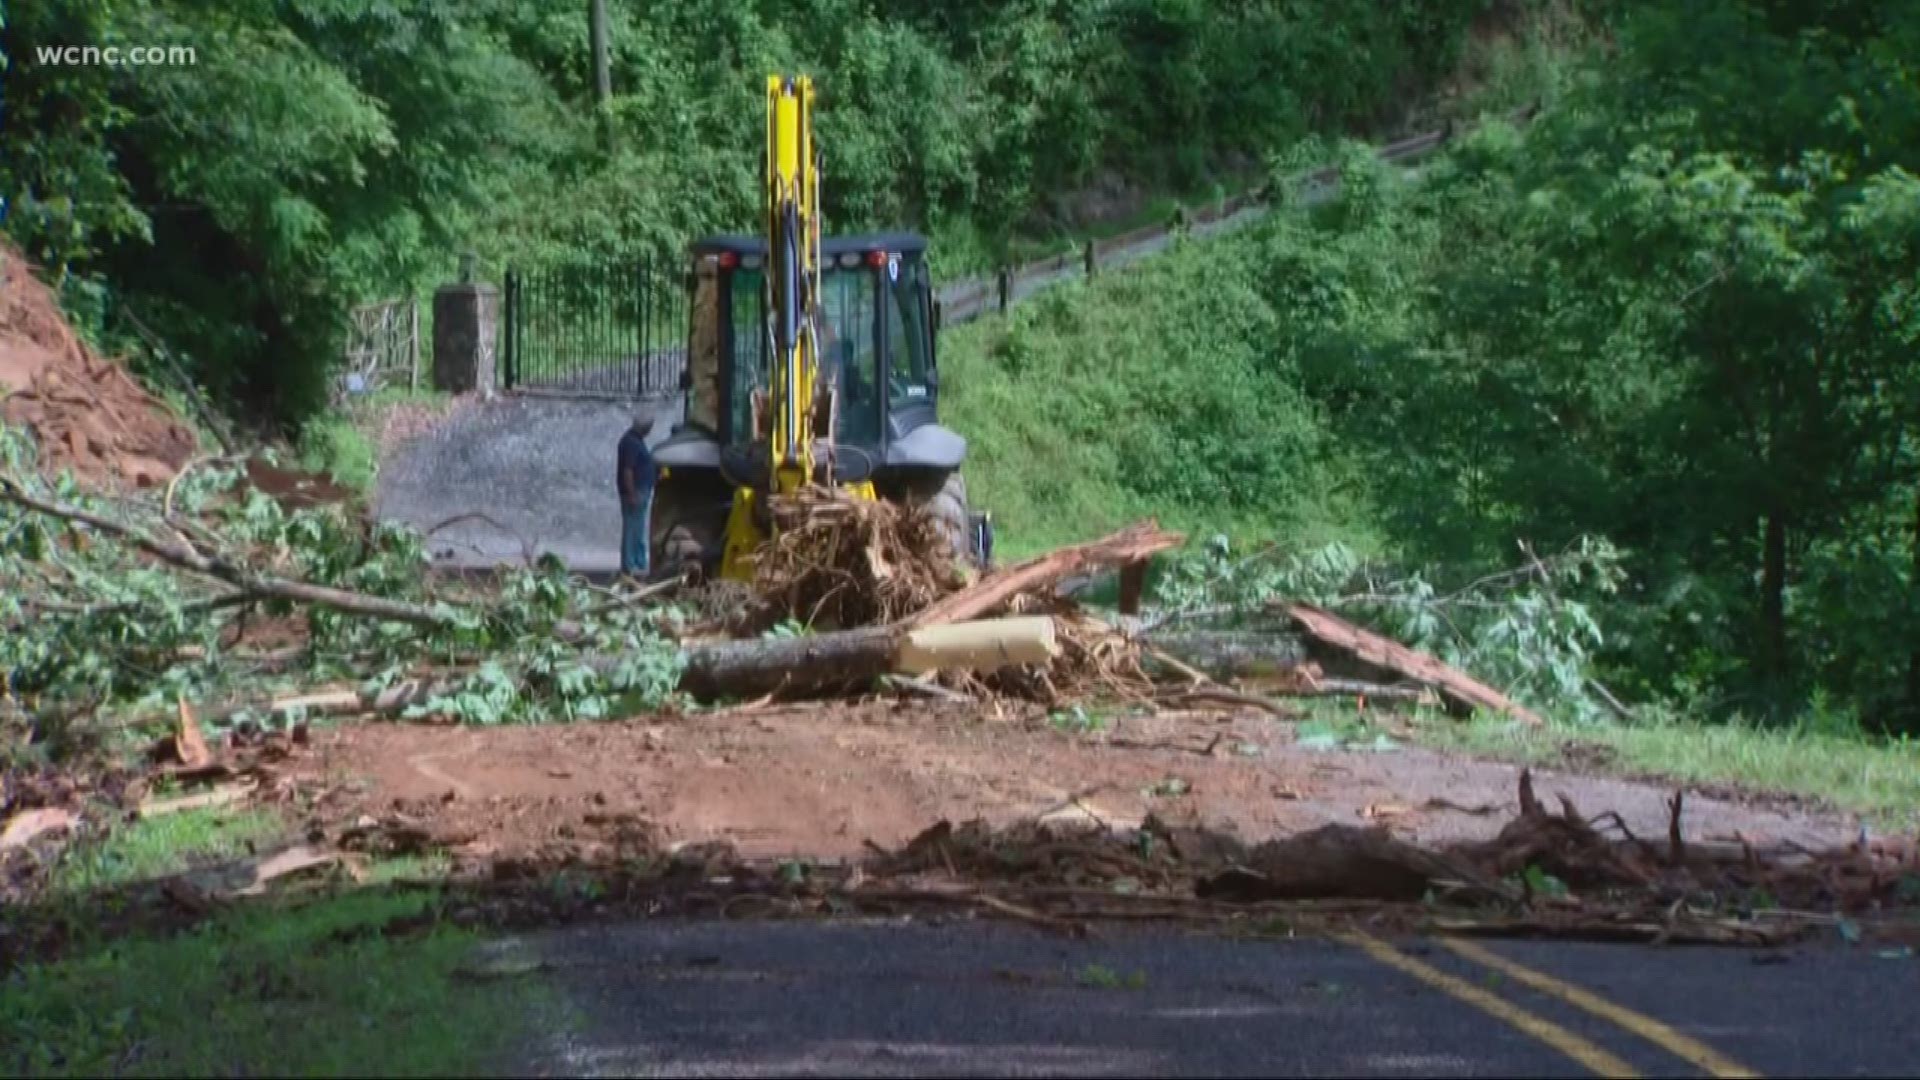 Two months after Sub-tropical storm Alberto triggered landslides in Watagua County, the clean up is still underway.